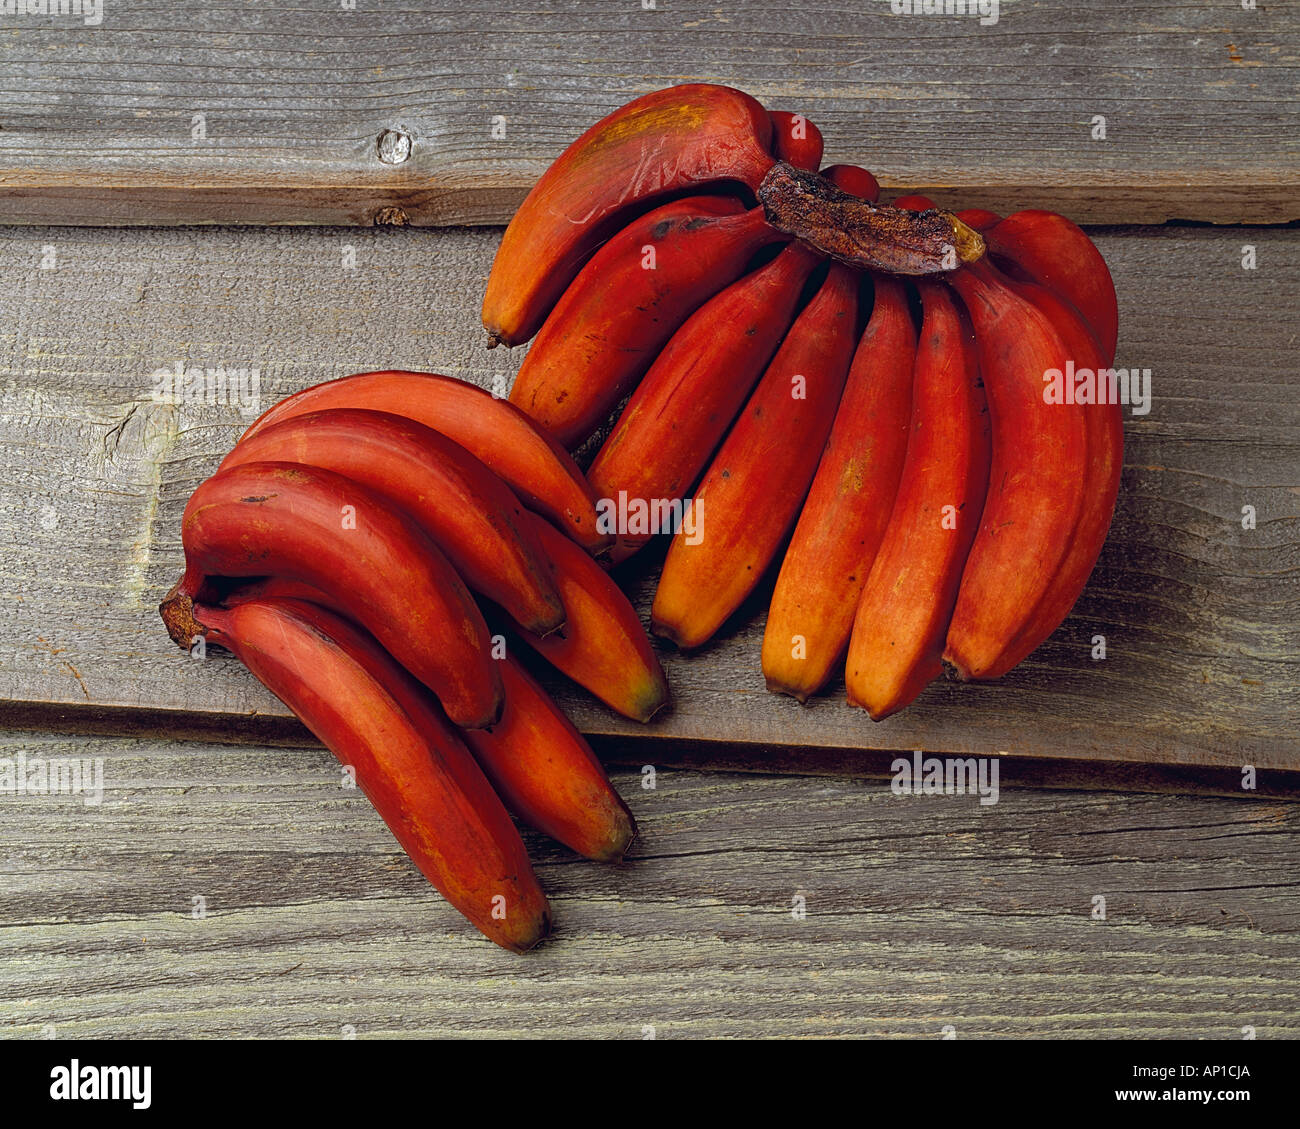 Agriculture - Red bananas on a barnwood surface, in studio. Stock Photo